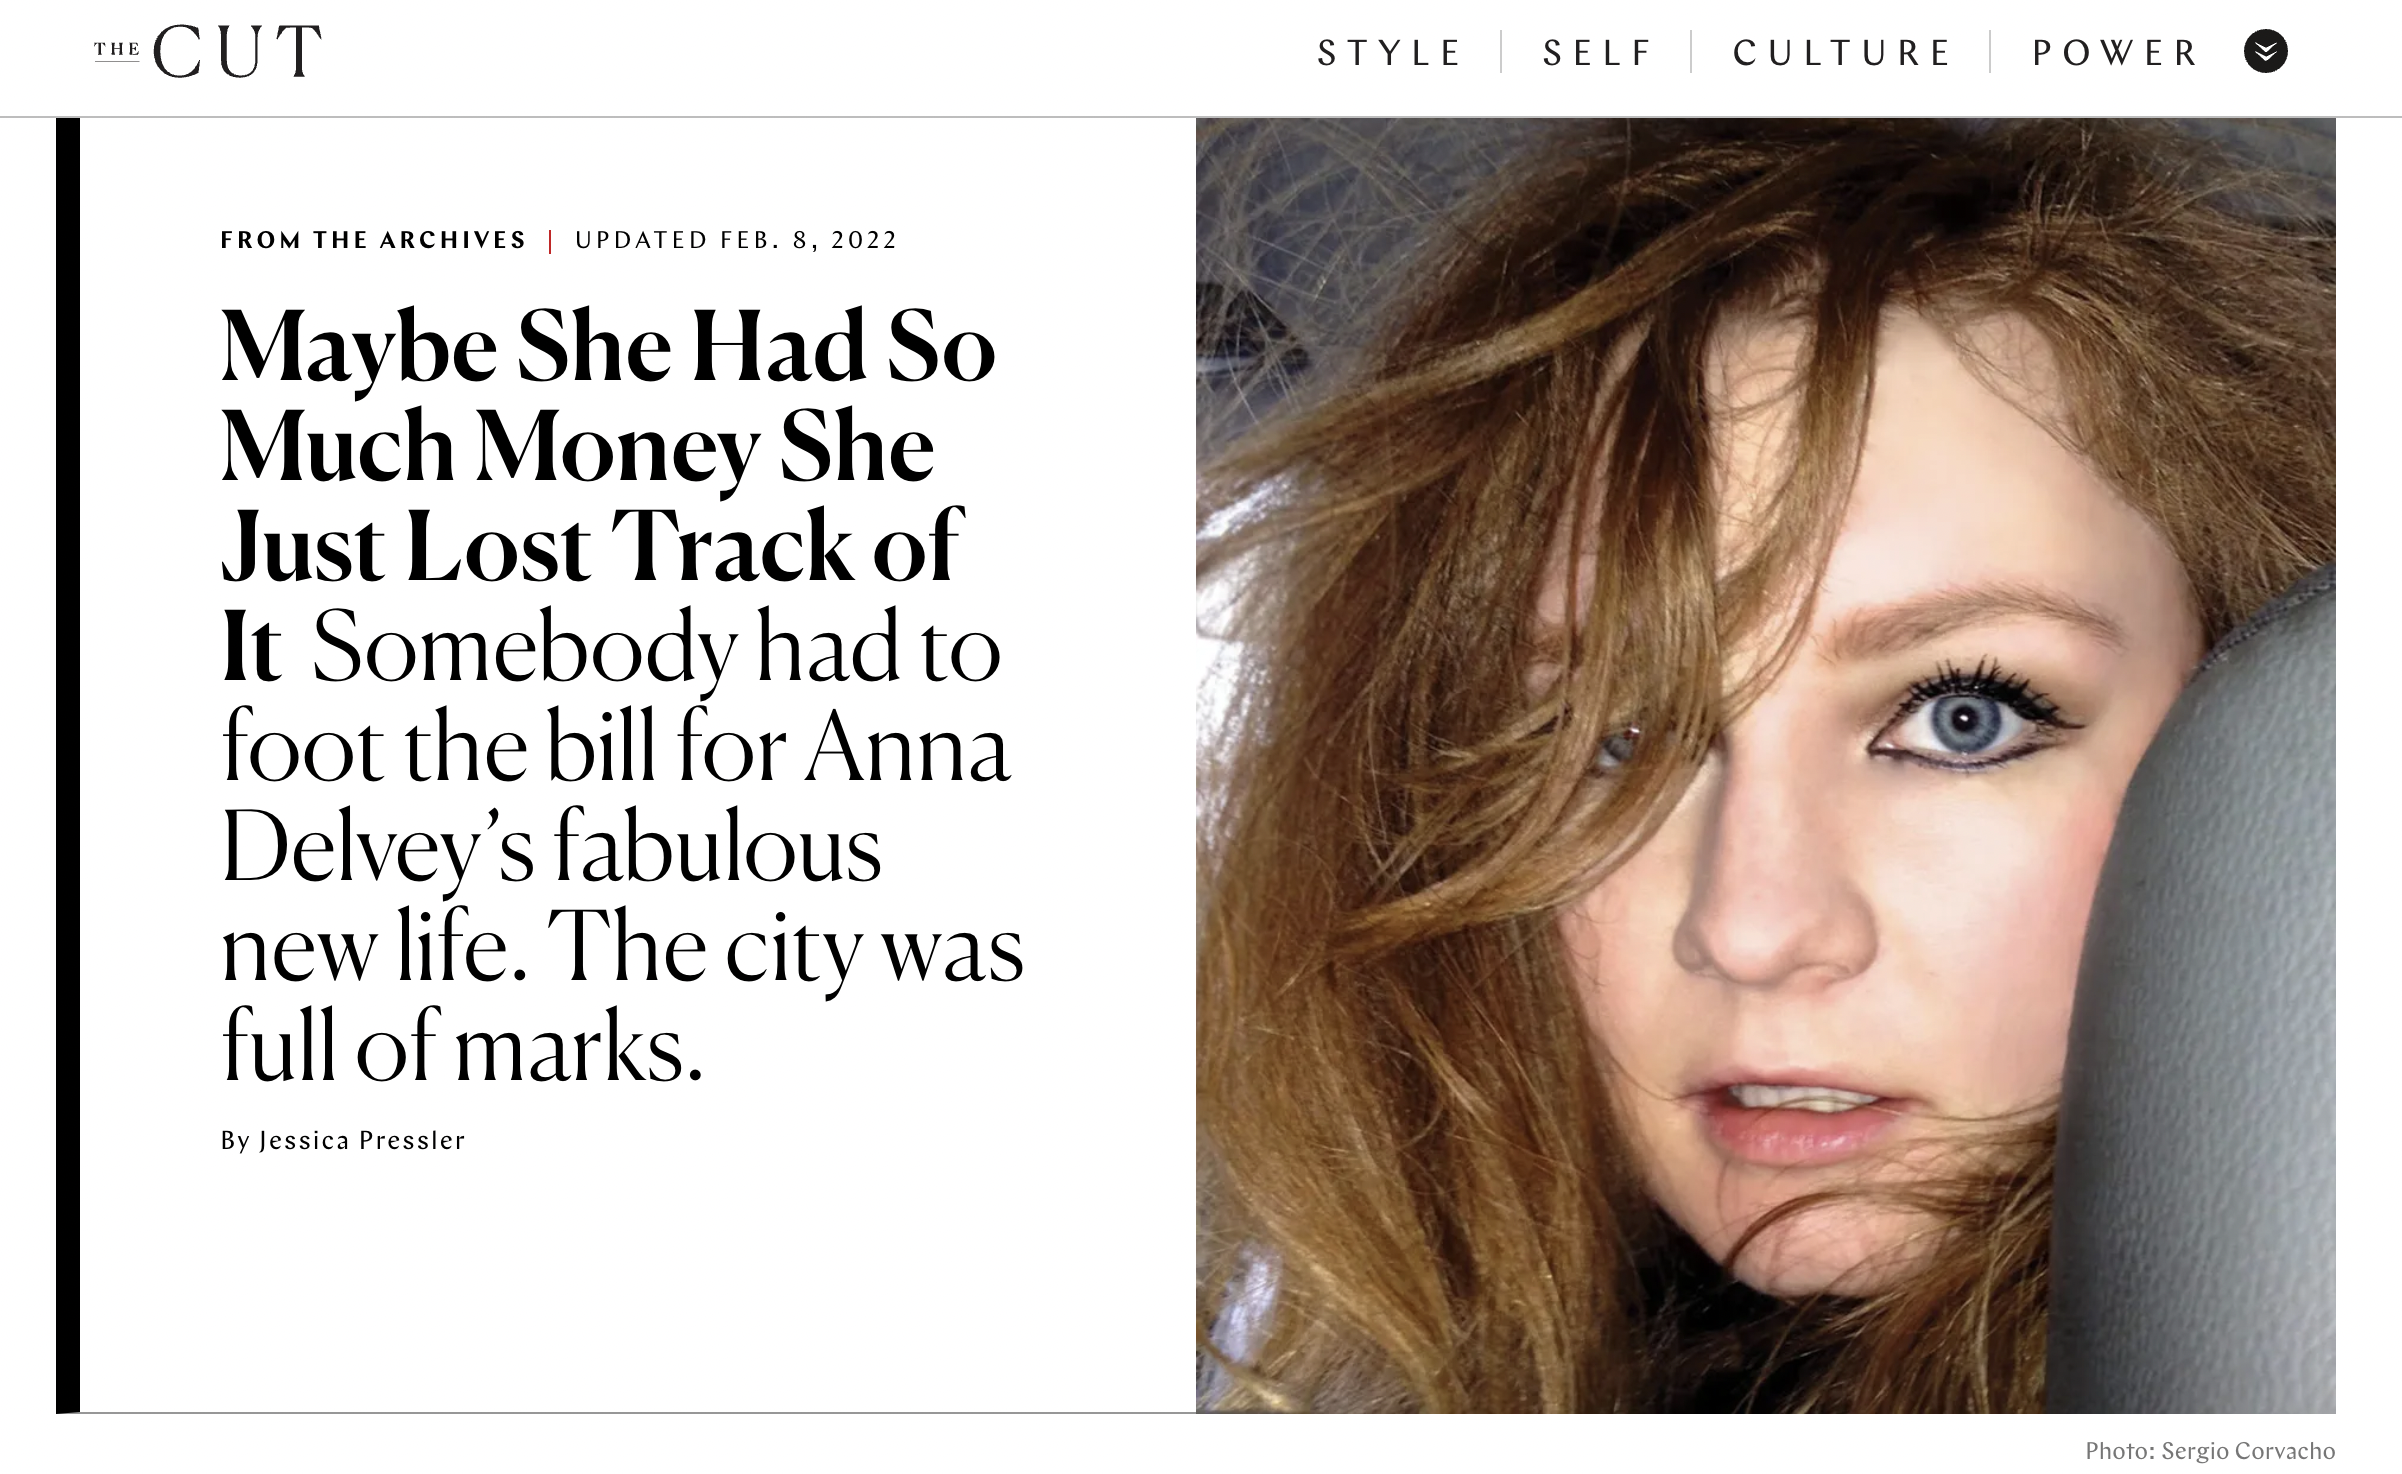 The title image for the New York Magazine article on Anna Delvey. At the top it says The Cut, STYLE, SELF, CULTURE, POWER. Below on the right there is a picture of a Anna looking over her shoulder with very messy light auburn hair. She has hard eyeliner around her blue eyes. Her mouth is slightly open. The headline reads: From the archives| Updated Feb. 8, 2022 Maybe She Had So Much Money She Just Lost Track of It Somebody had to foot the bill for Anna Delvey's fabulous new life. The city was full of marks. By Jessica Pressler